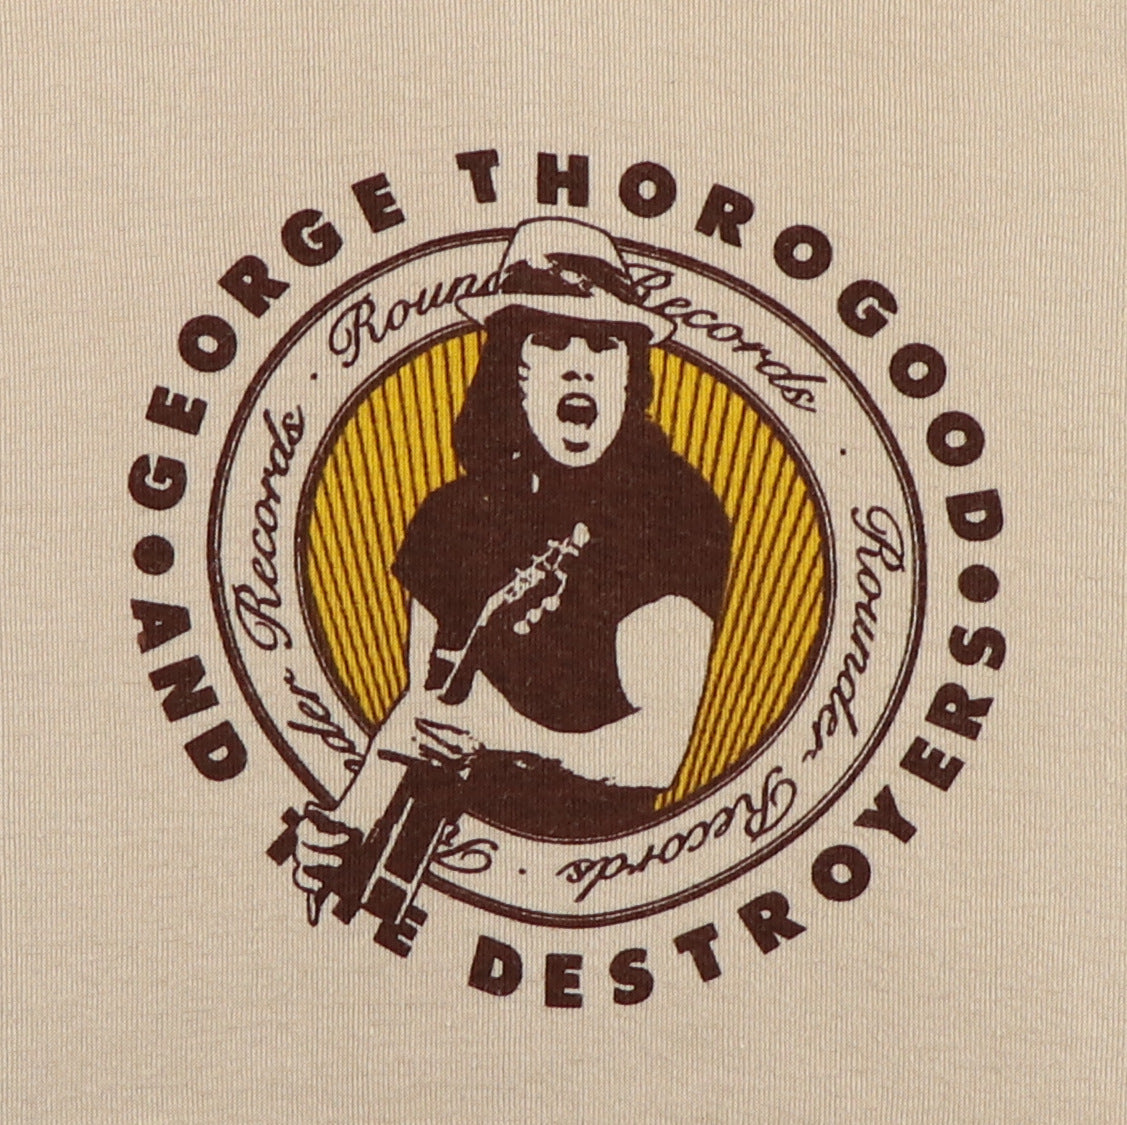 1977 George Thorogood And The Destroyers Rounder Records Shirt